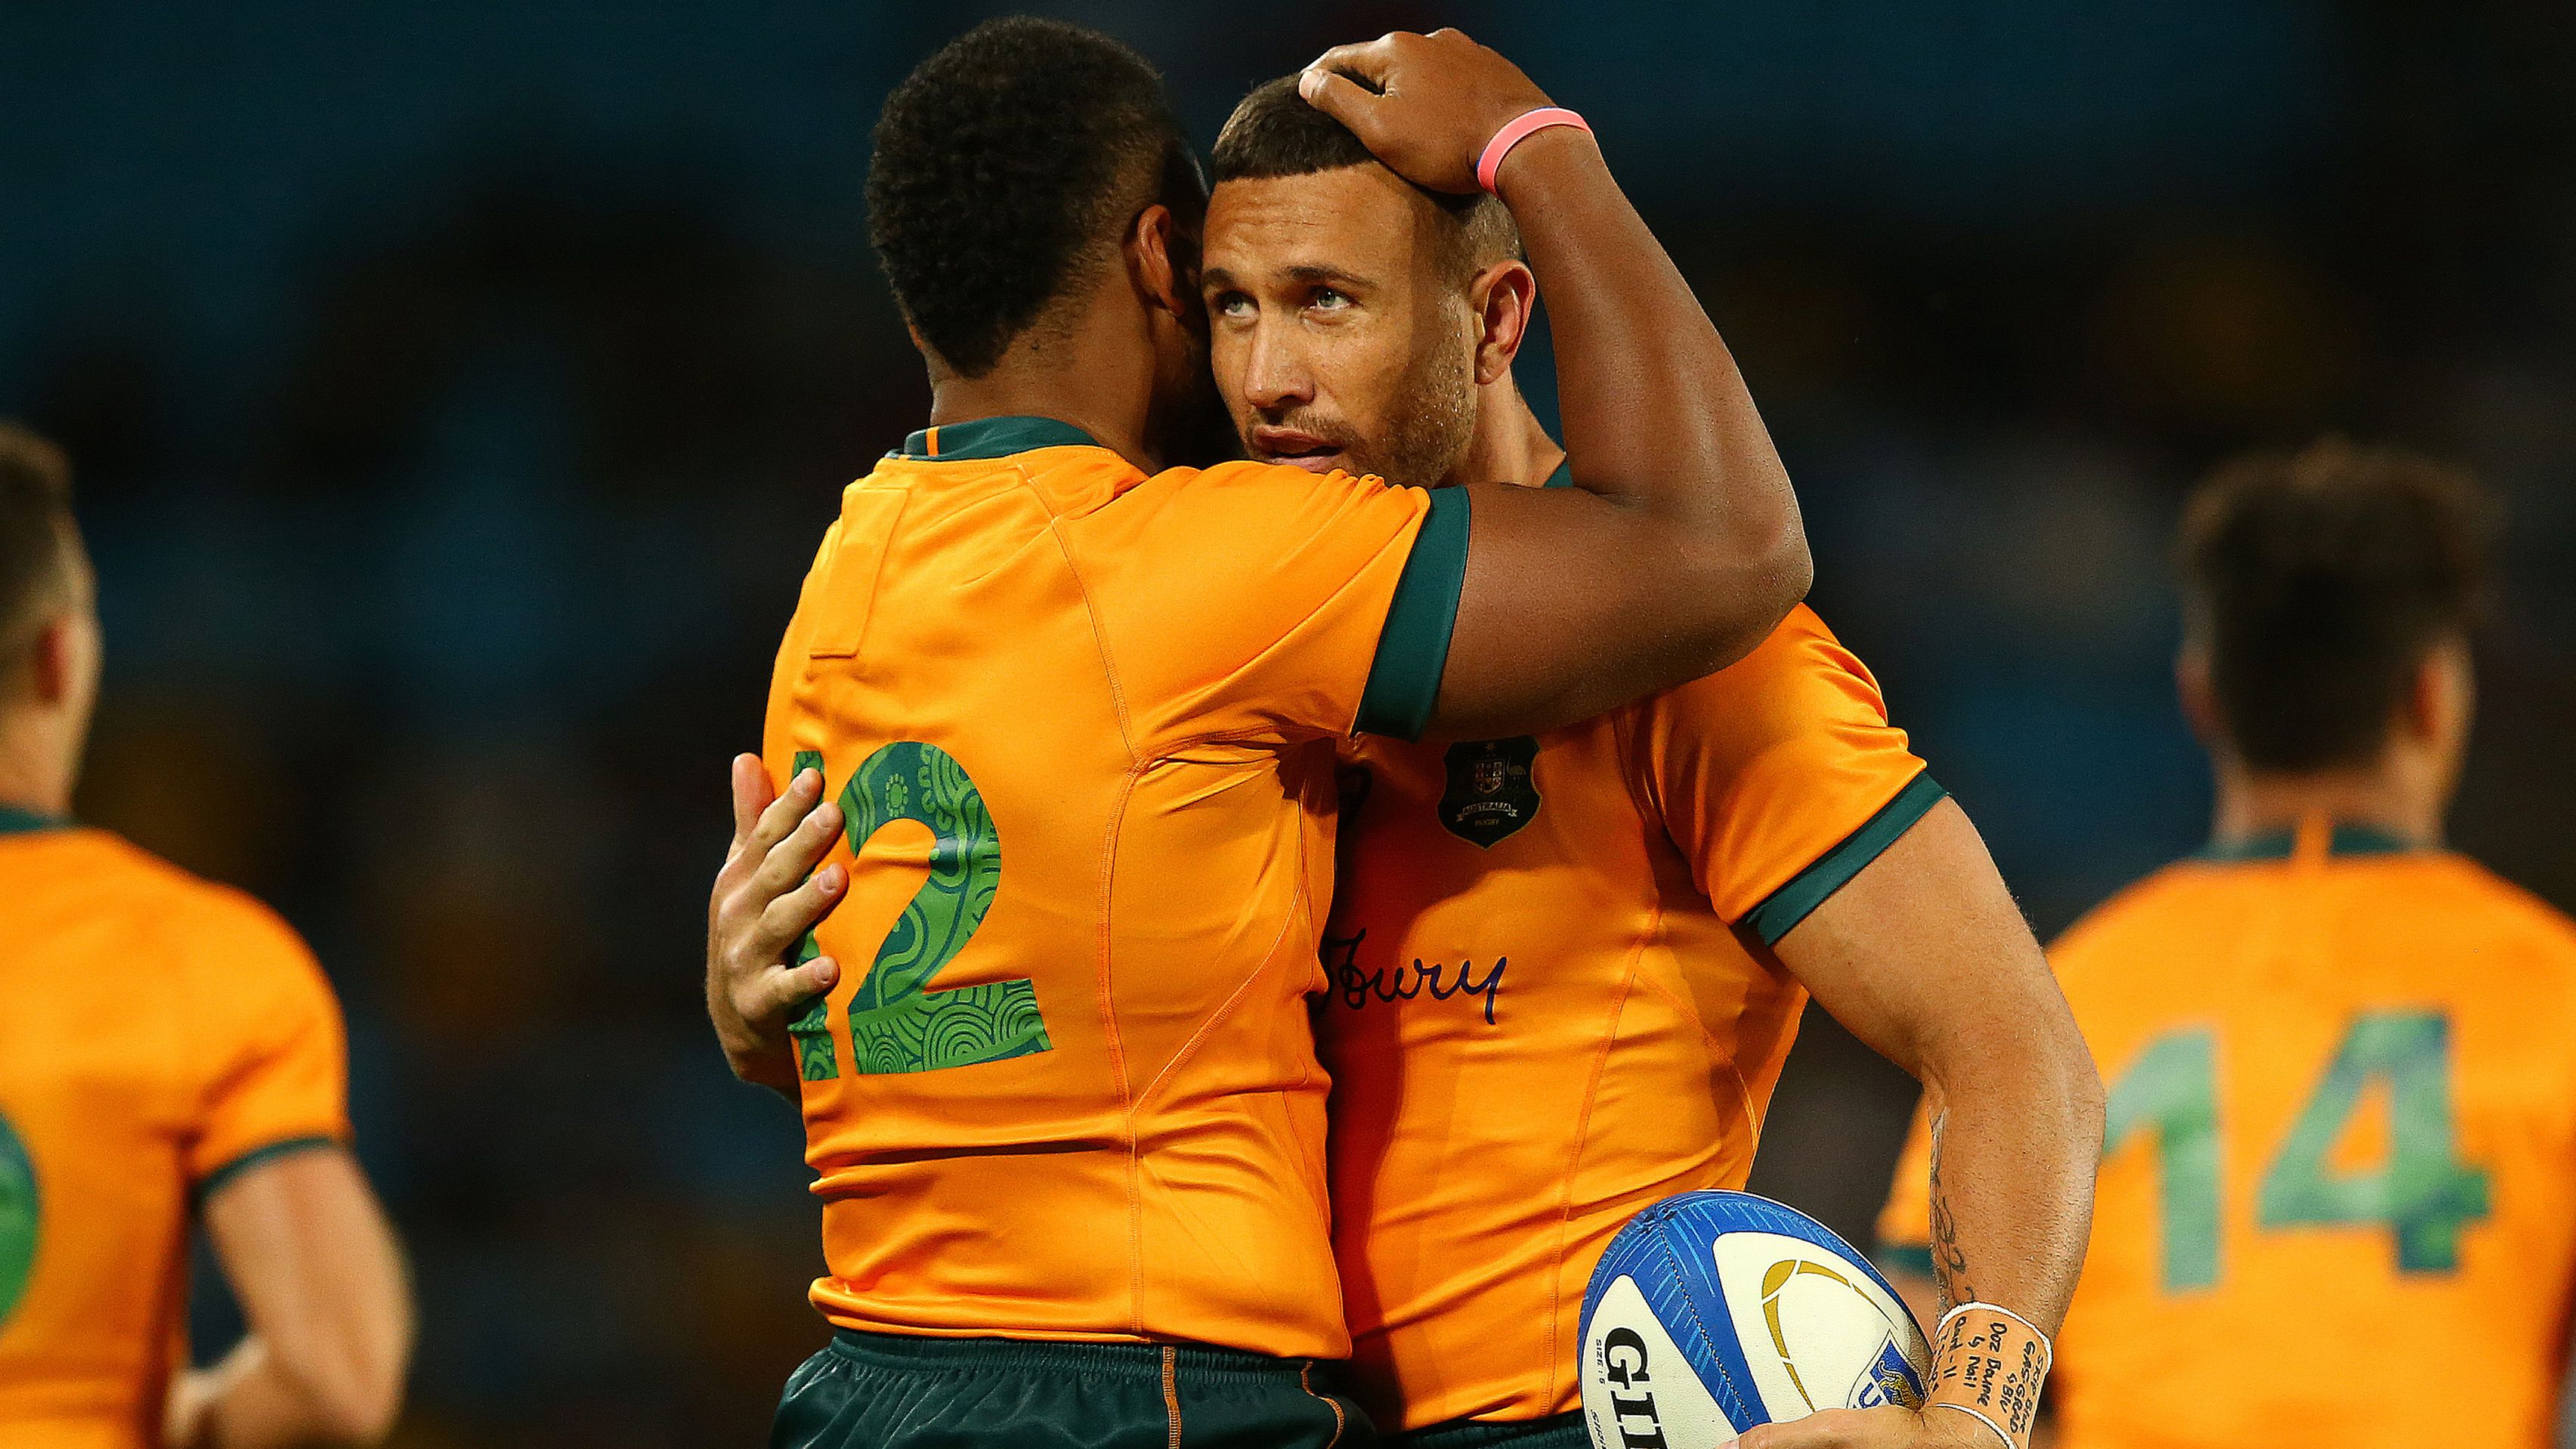 Samu Kerevi and Quade Cooper of the Wallabies celebrate a try during The Rugby Championship match between the Argentina Pumas and the Australian Wallabies at Cbus Super Stadium on October 02, 2021 in Gold Coast, Australia. (Photo by Jono Searle/Getty Images)